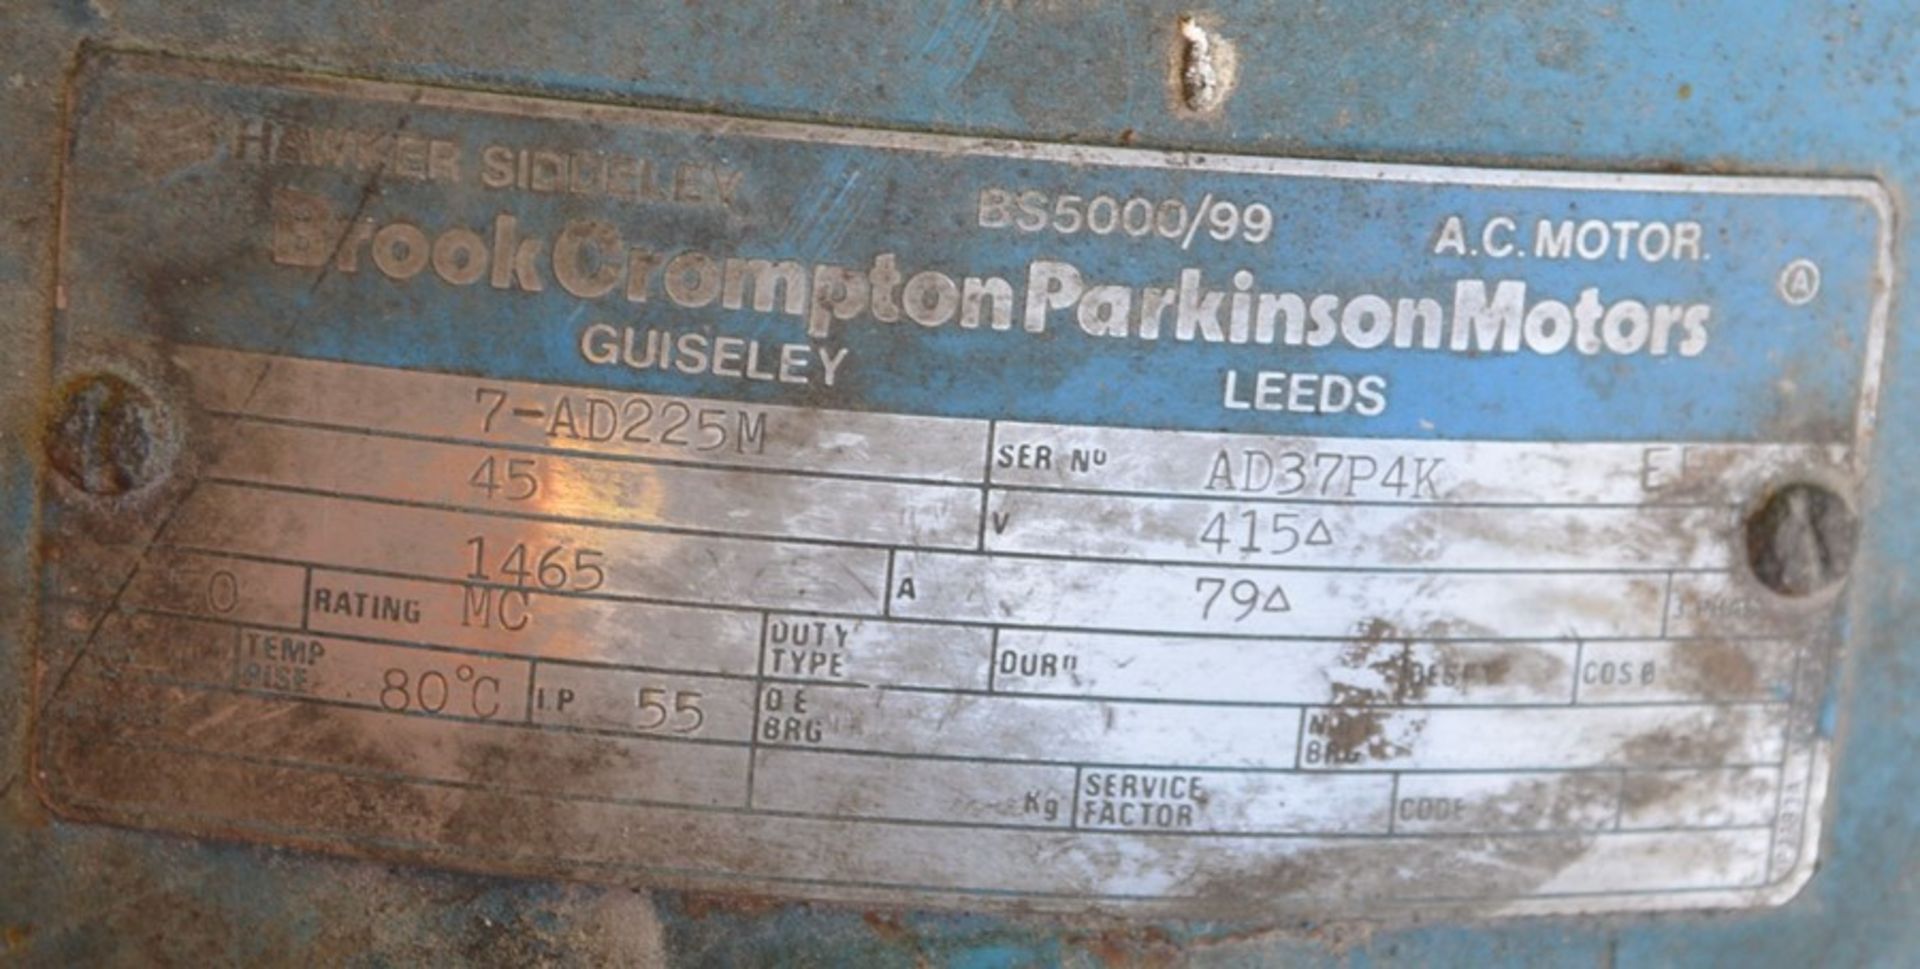 Brook Crompton Parkinson 7-AD225M 45kW Electric Mo - Image 3 of 3